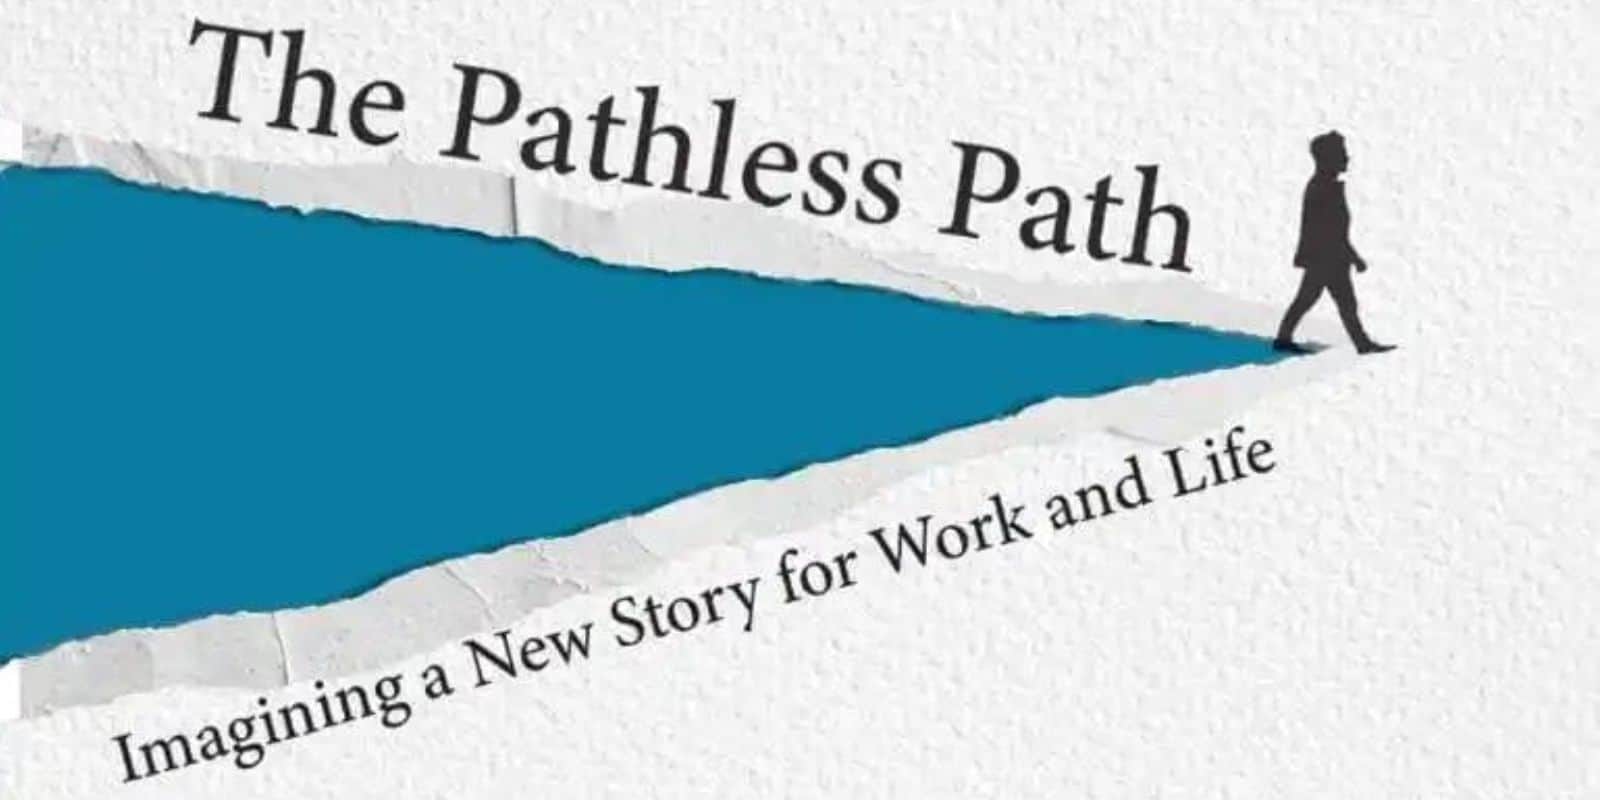 The Pathless Path by Paul Millerd